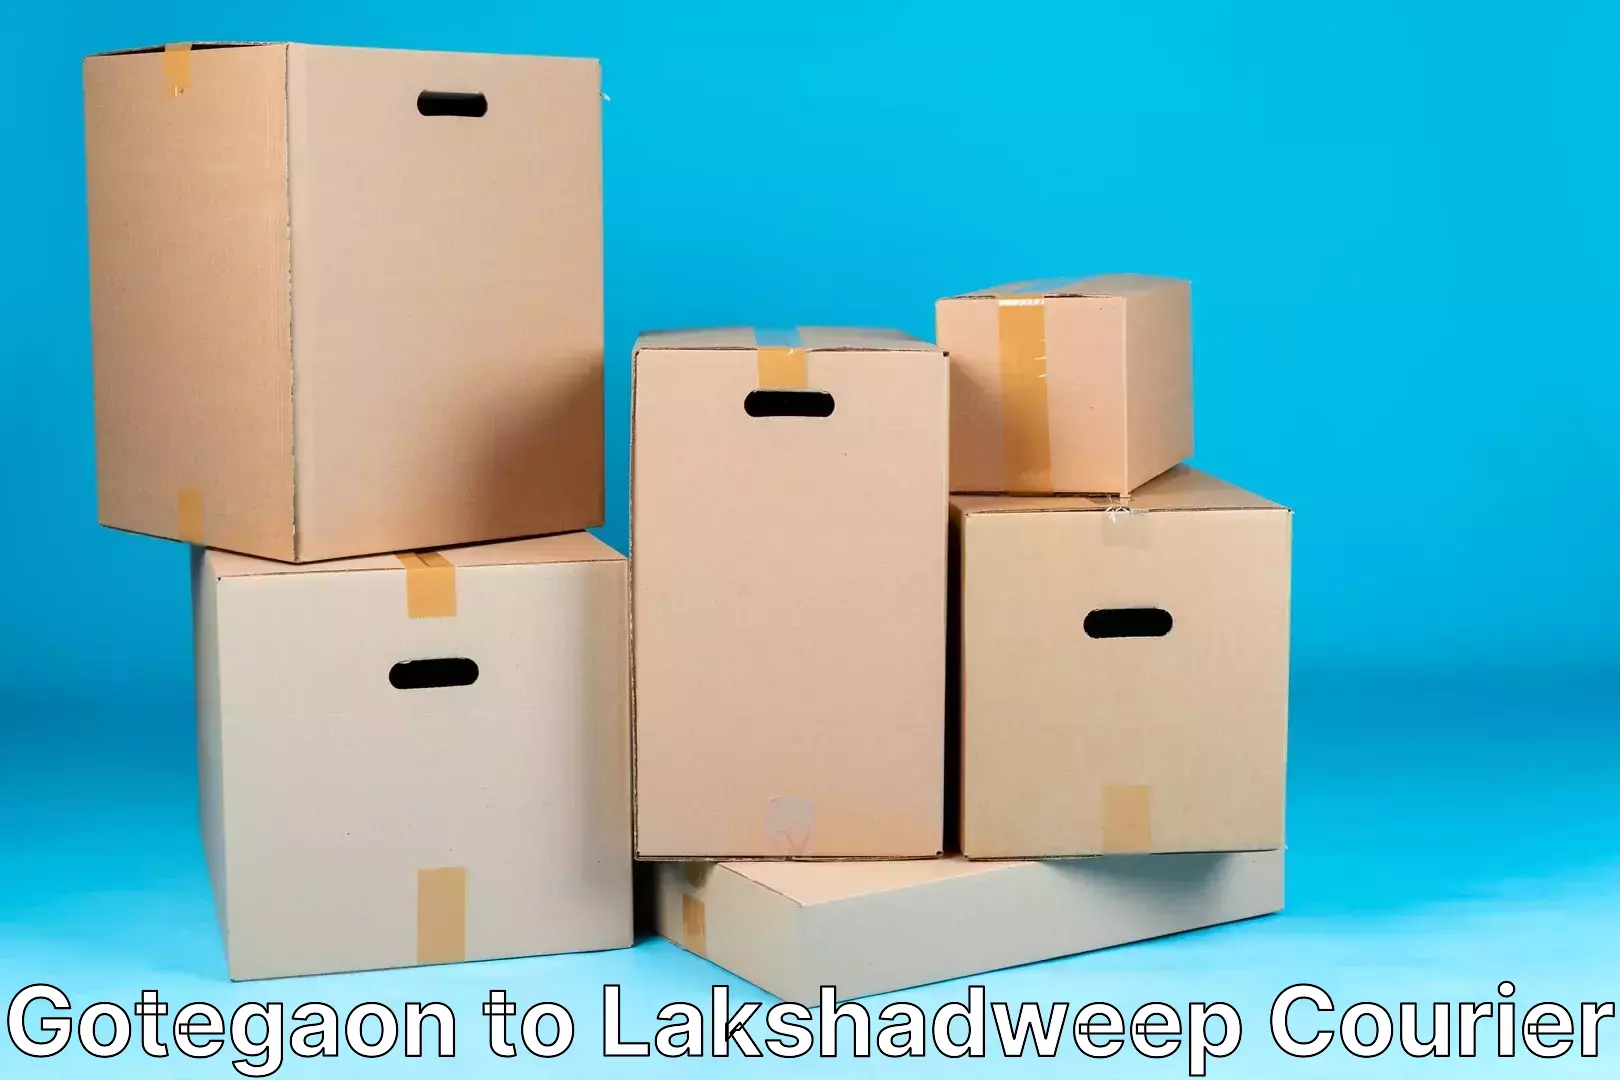 Modern courier technology Gotegaon to Lakshadweep